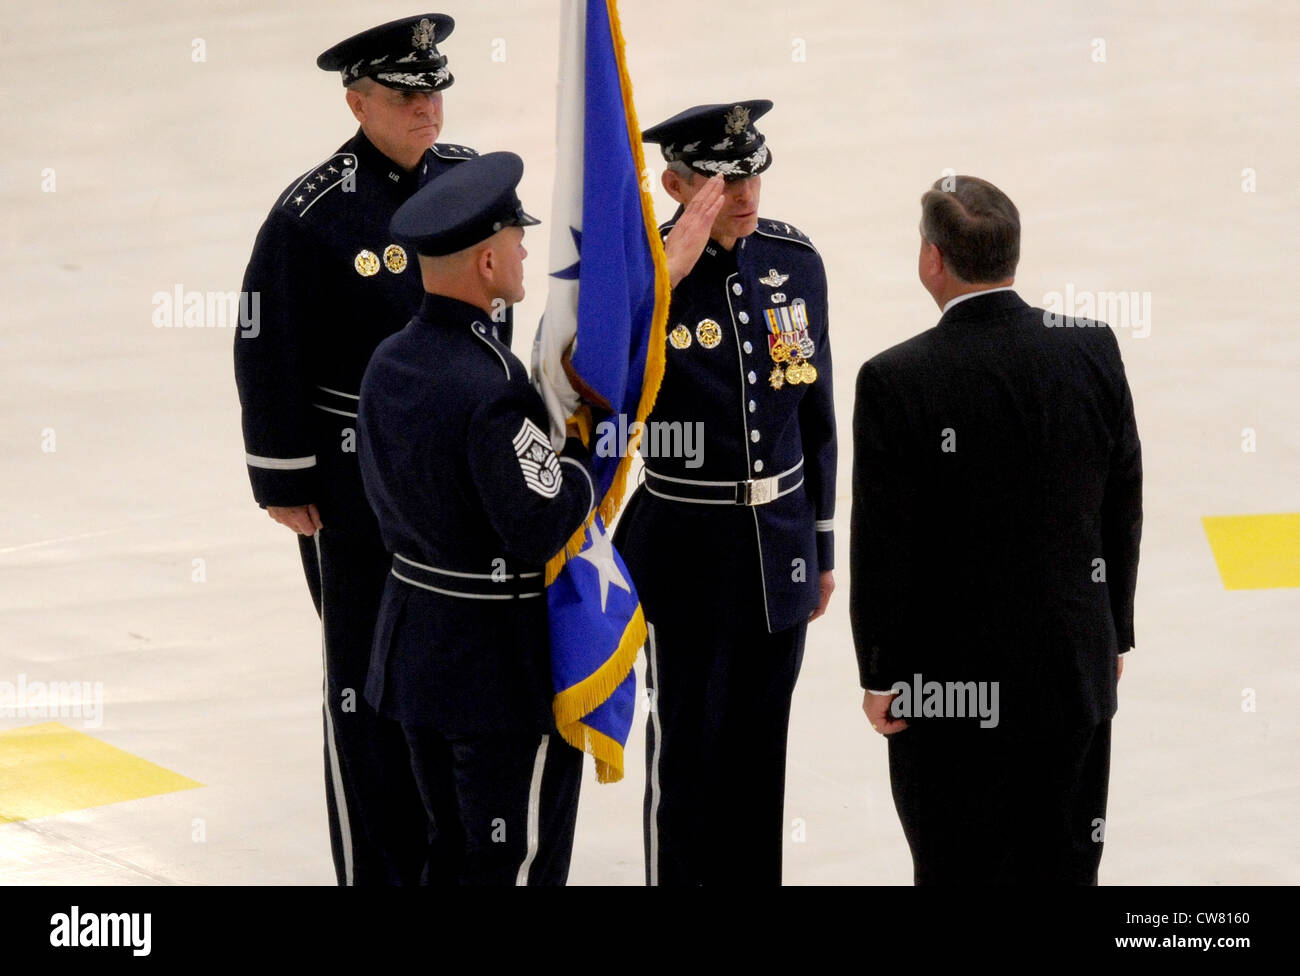 Newly appointed Air Force Chief of Staff Gen. Mark A. Welsh III salutes Secretary of the Air Force Michael Donley during a ceremony at Joint Base Andrews, Md., Aug. 10, 2012. Prior to his new position, he was the commander of U.S. Air Forces in Europe. Stock Photo